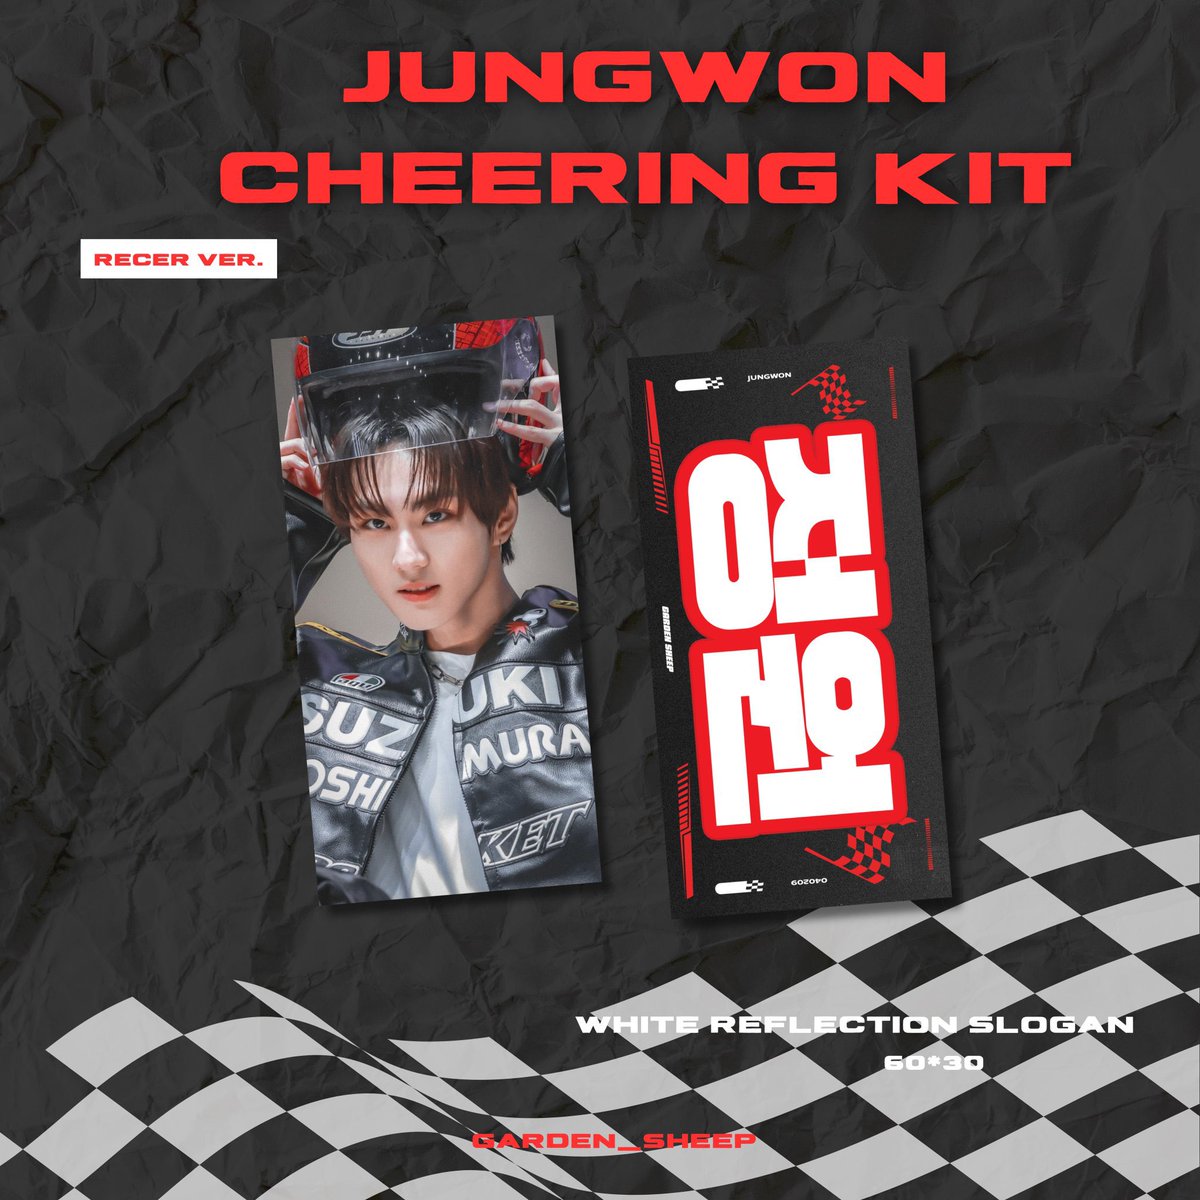 ☁️ — ꒰ #GOgeca ꒱ 

#Jungwon Cheering Kit by @.GDS_0209

✷  Band Version 🎤
            • ₱1150 + isf
✷  Racer Version 🏁
            • ₱1150 + isf

🖇️ Inclusions : slogan + clear bag + 3 photocards

⏰ DOO & DOP : until July 17

dm / mine + version + quantity